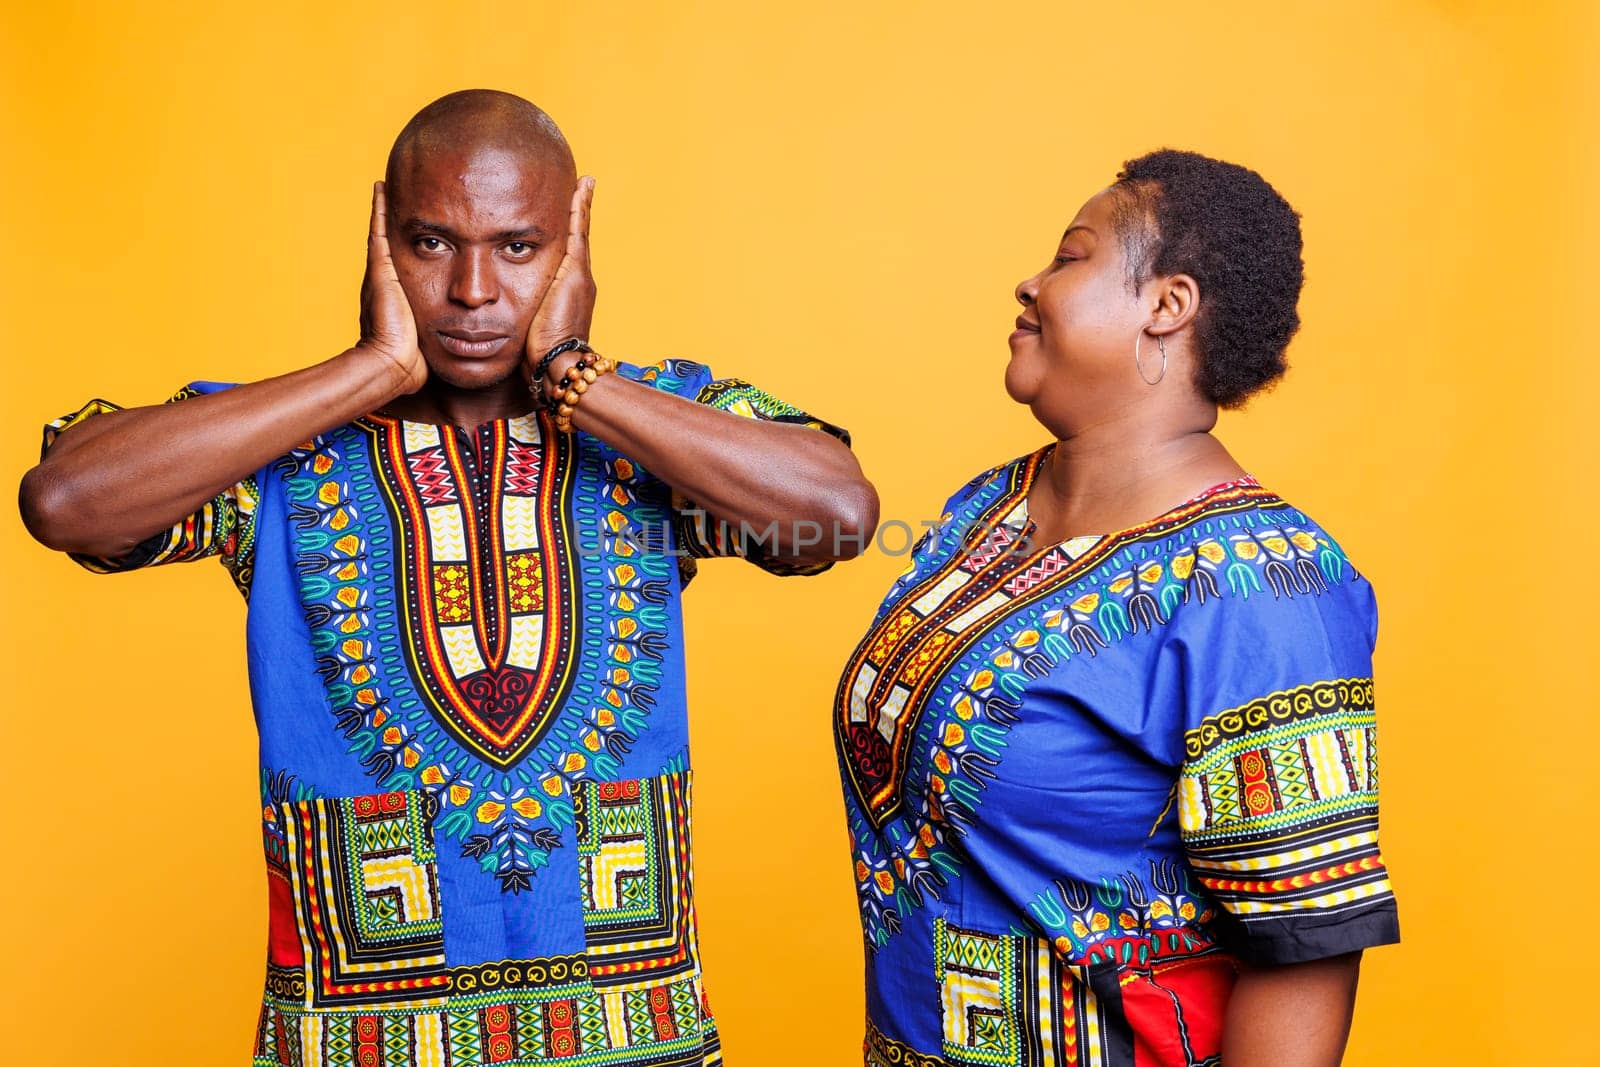 Husband covering ears with hands and ignoring wife talking. African american couple wearing ethnic clothes having communication problem and misunderstanding in relationship portrait